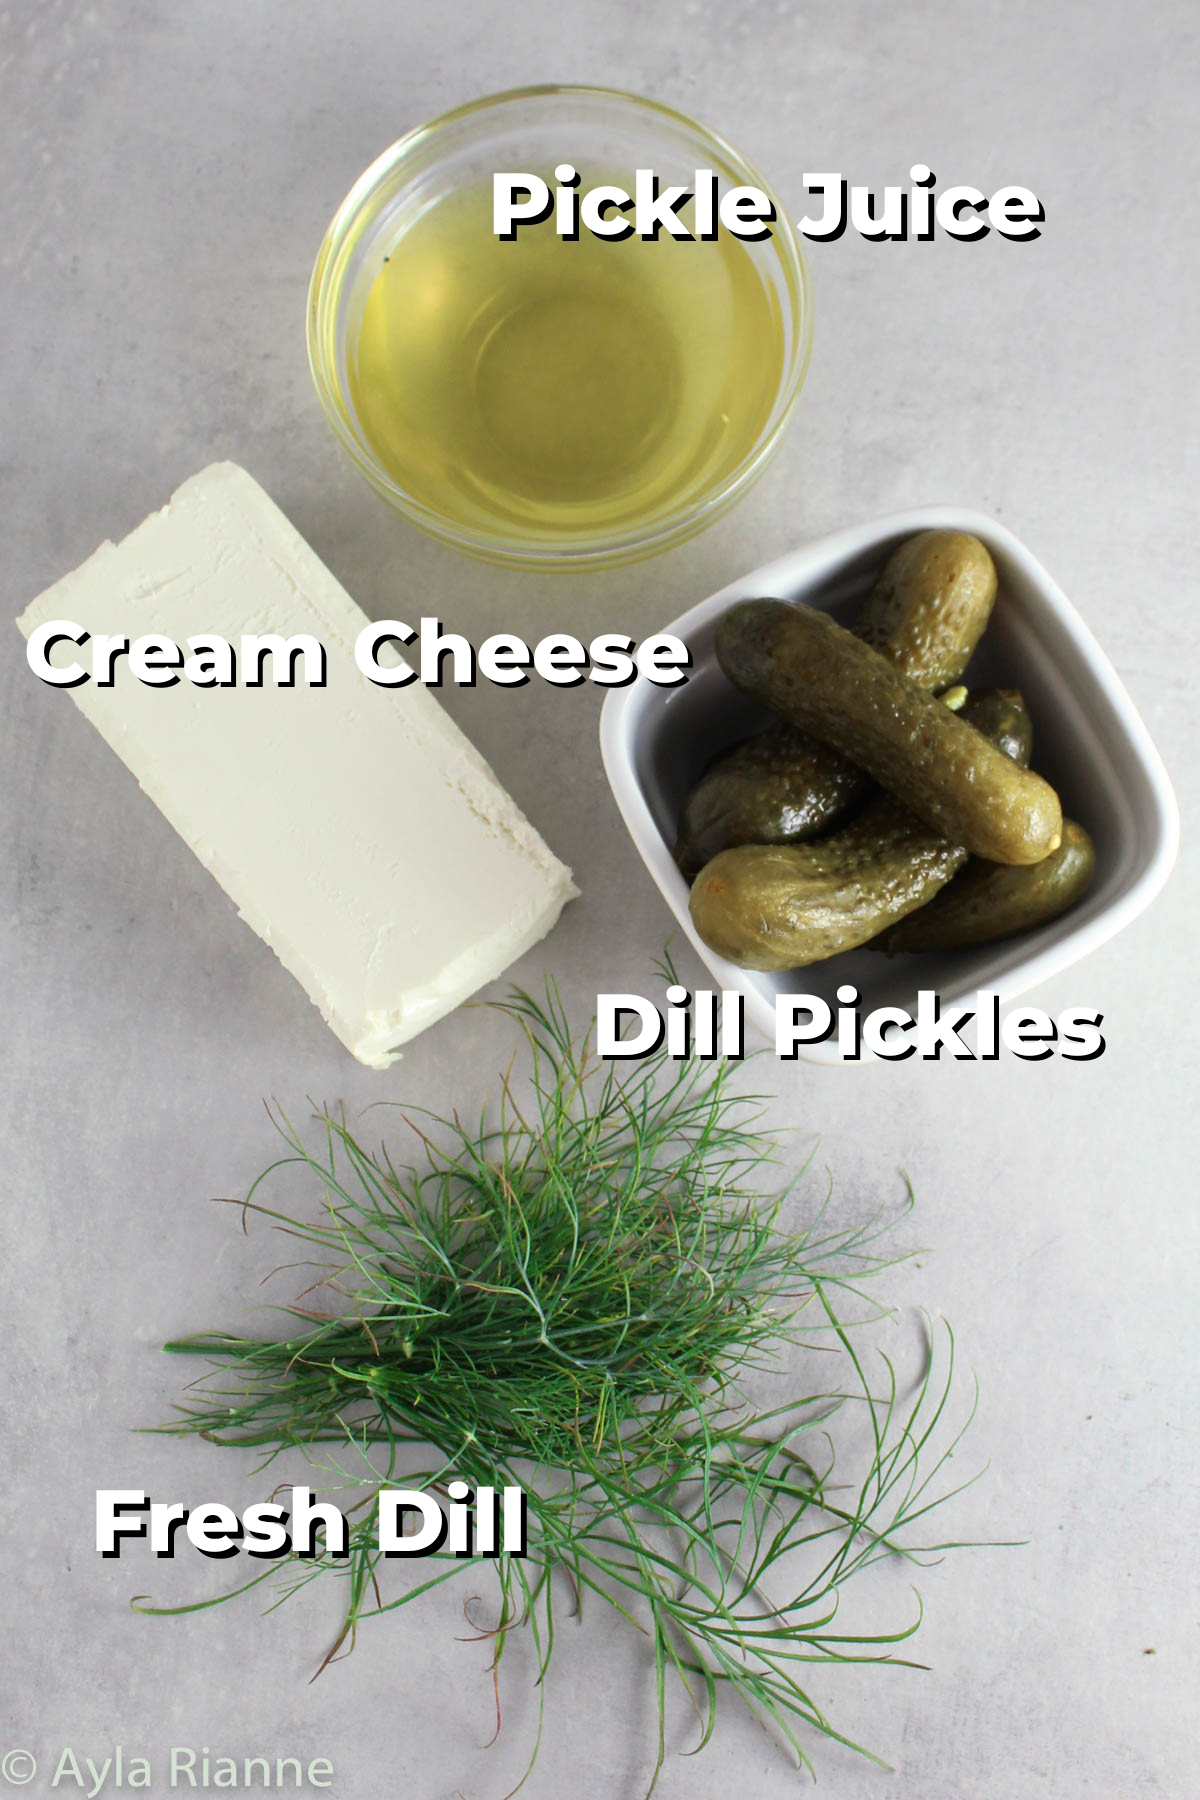 ingredients for dill pickle dip: pickly juice, cream cheese, pickles, and fill